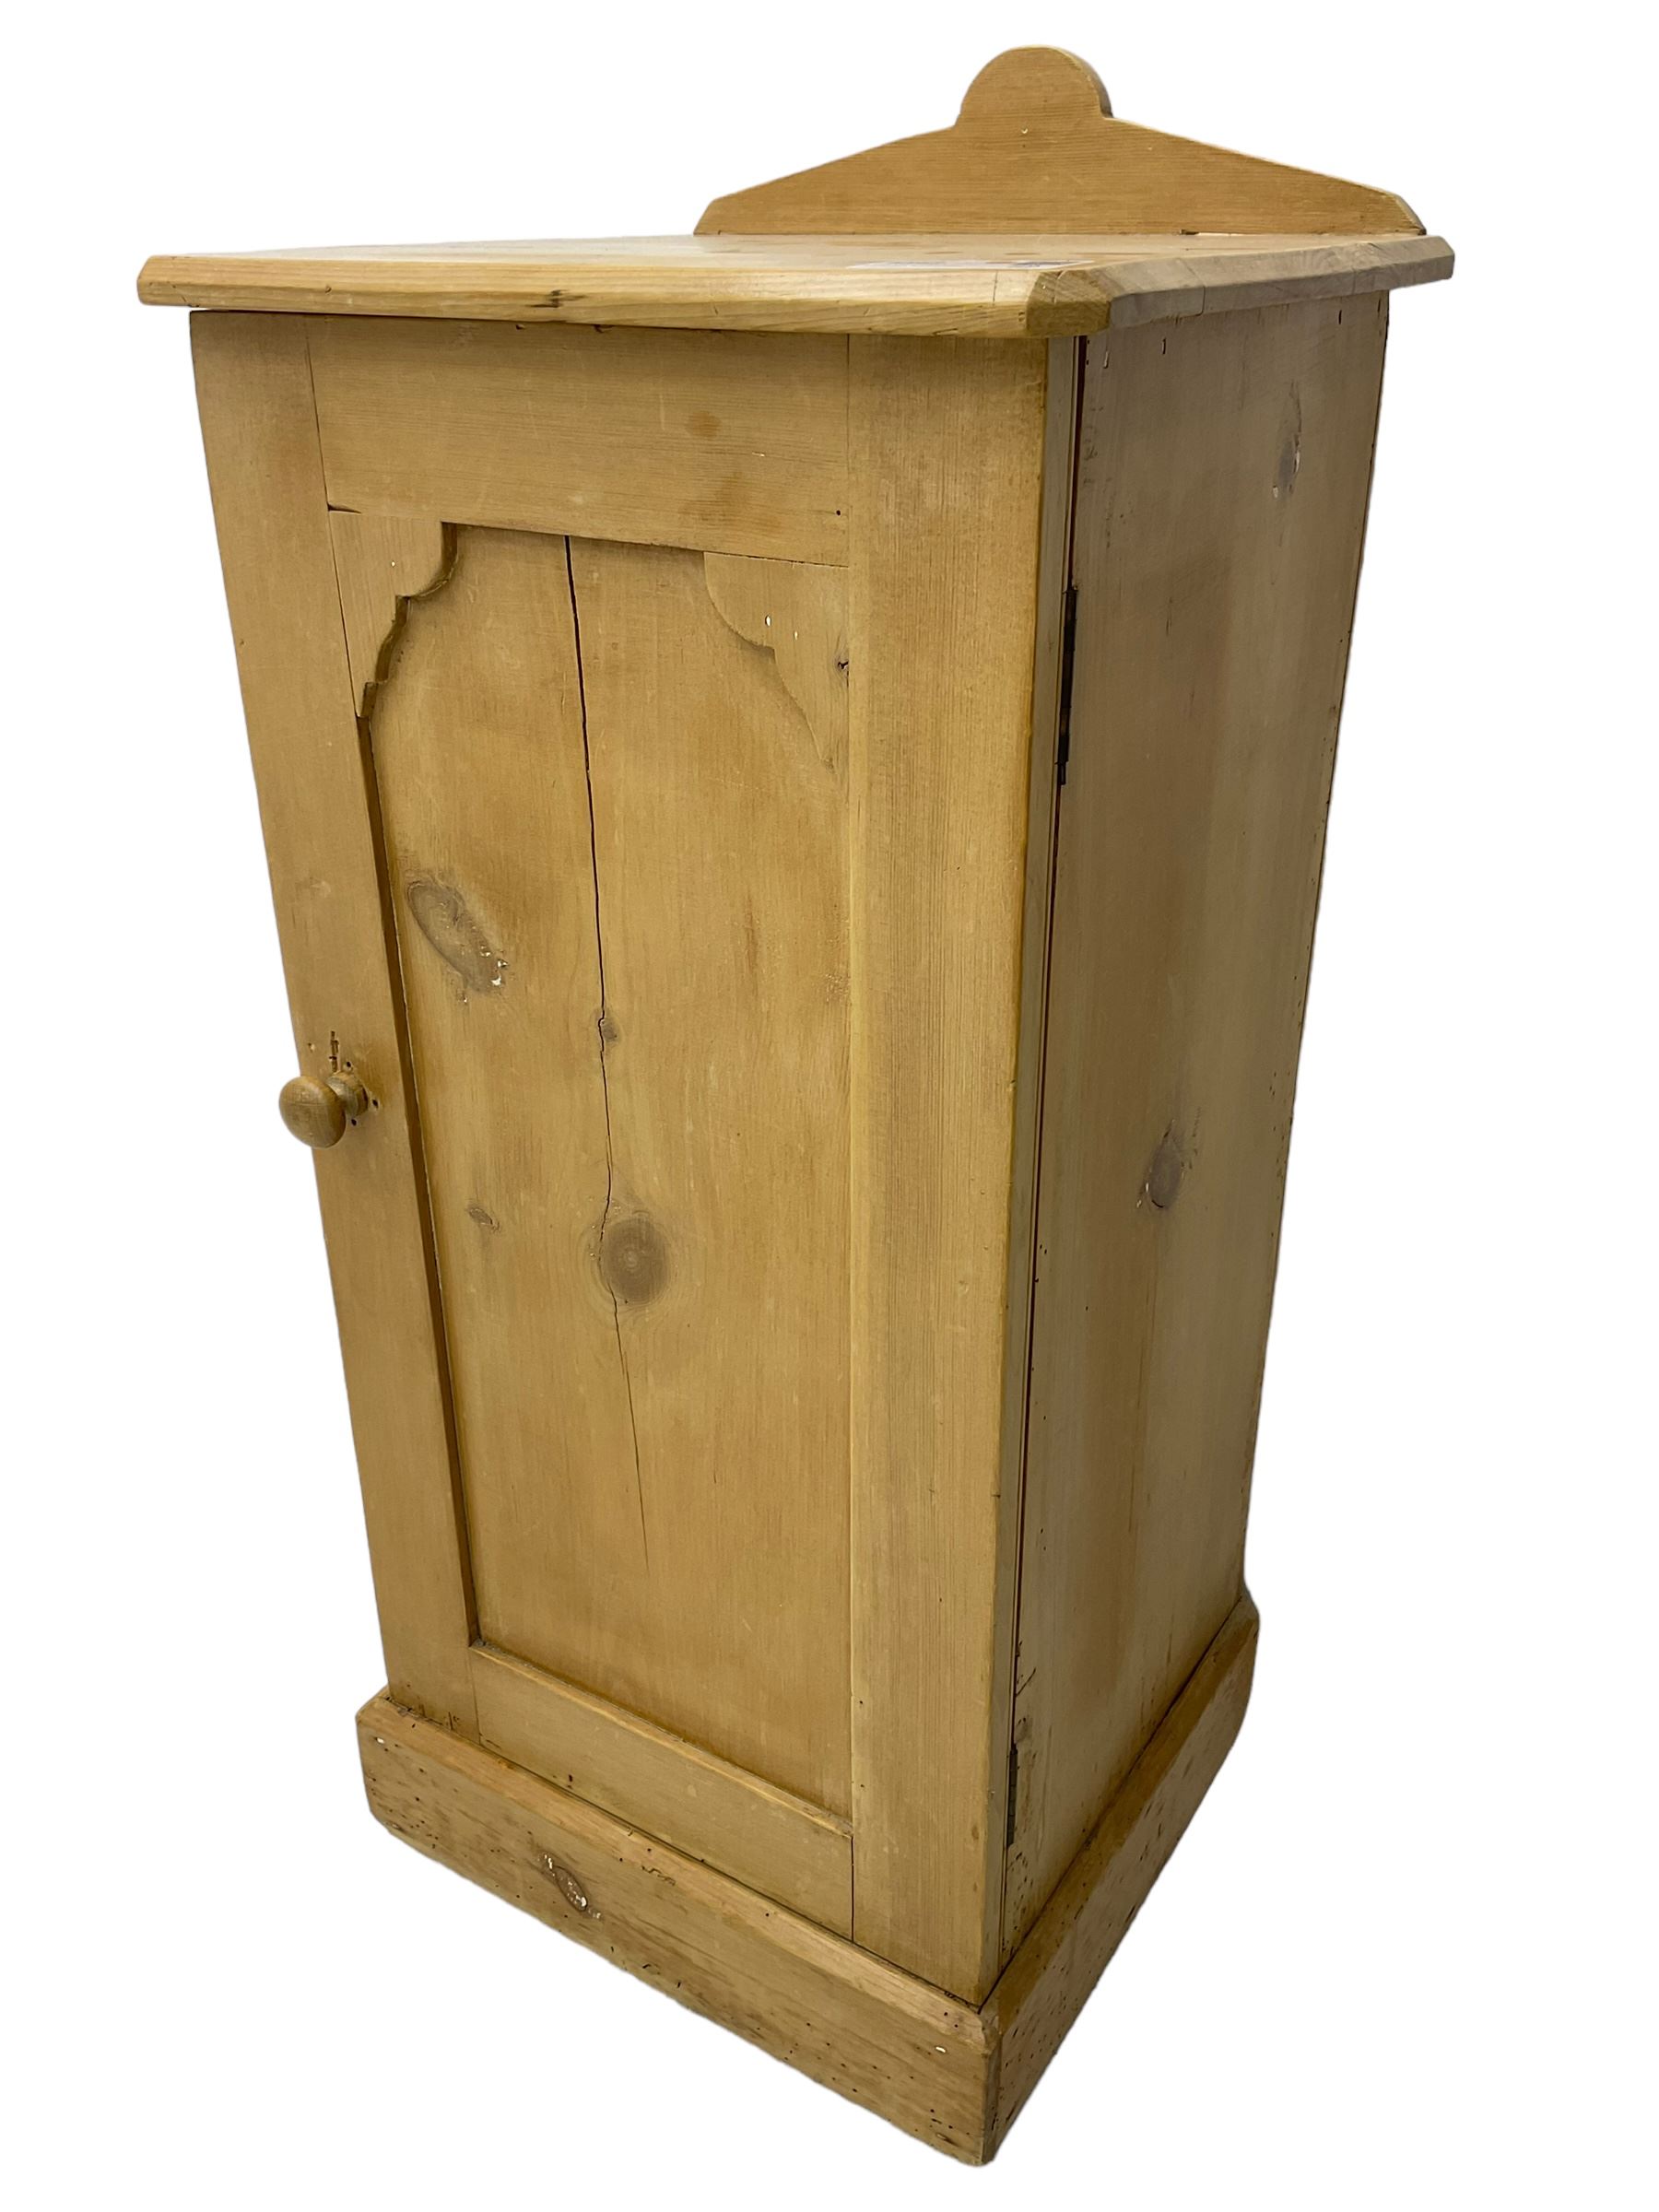 19th century waxed pine bedside cabinet - Image 3 of 3